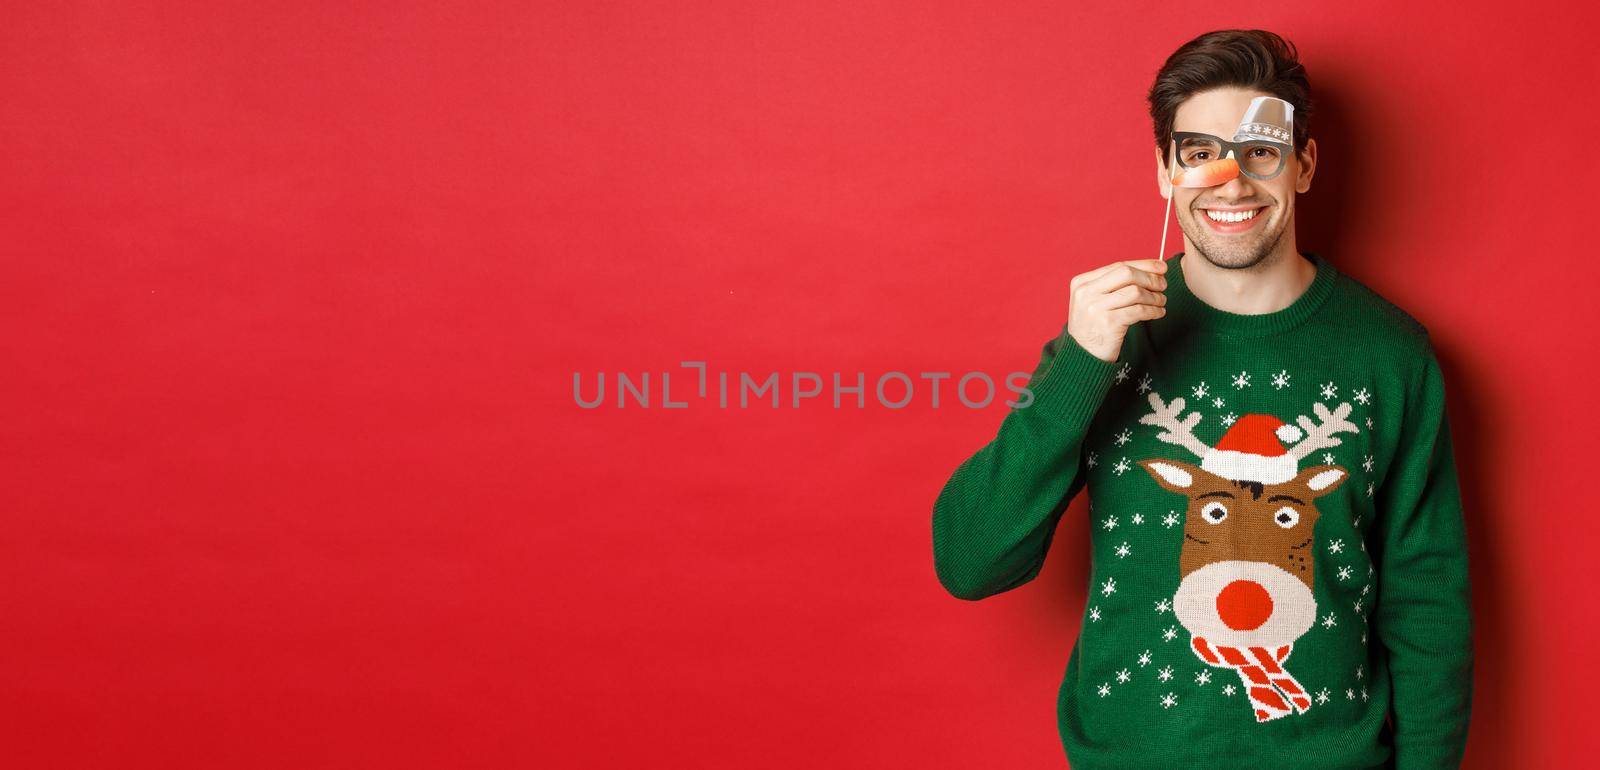 Funny man in christmas sweater and party mask, celebrating winter holidays, smiling happy, standing over red background.